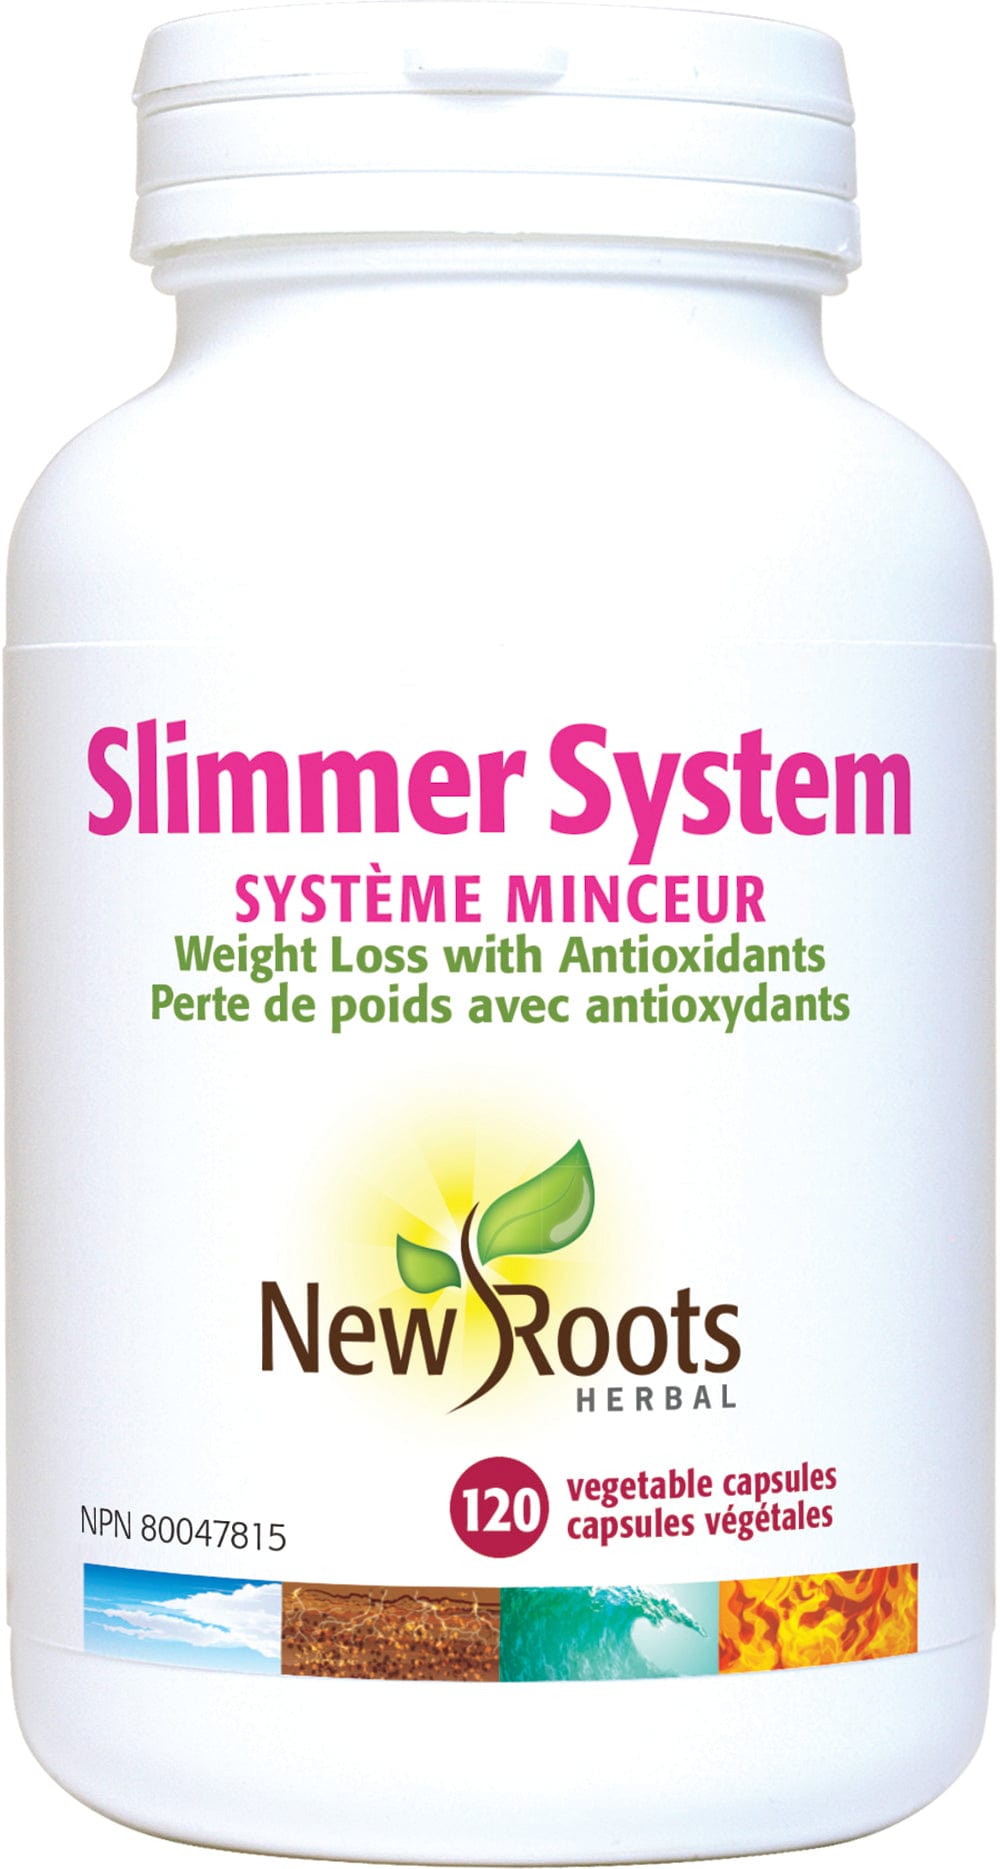 NEW ROOTS HERBAL Suppléments Système minceur (slimmer system) 120caps